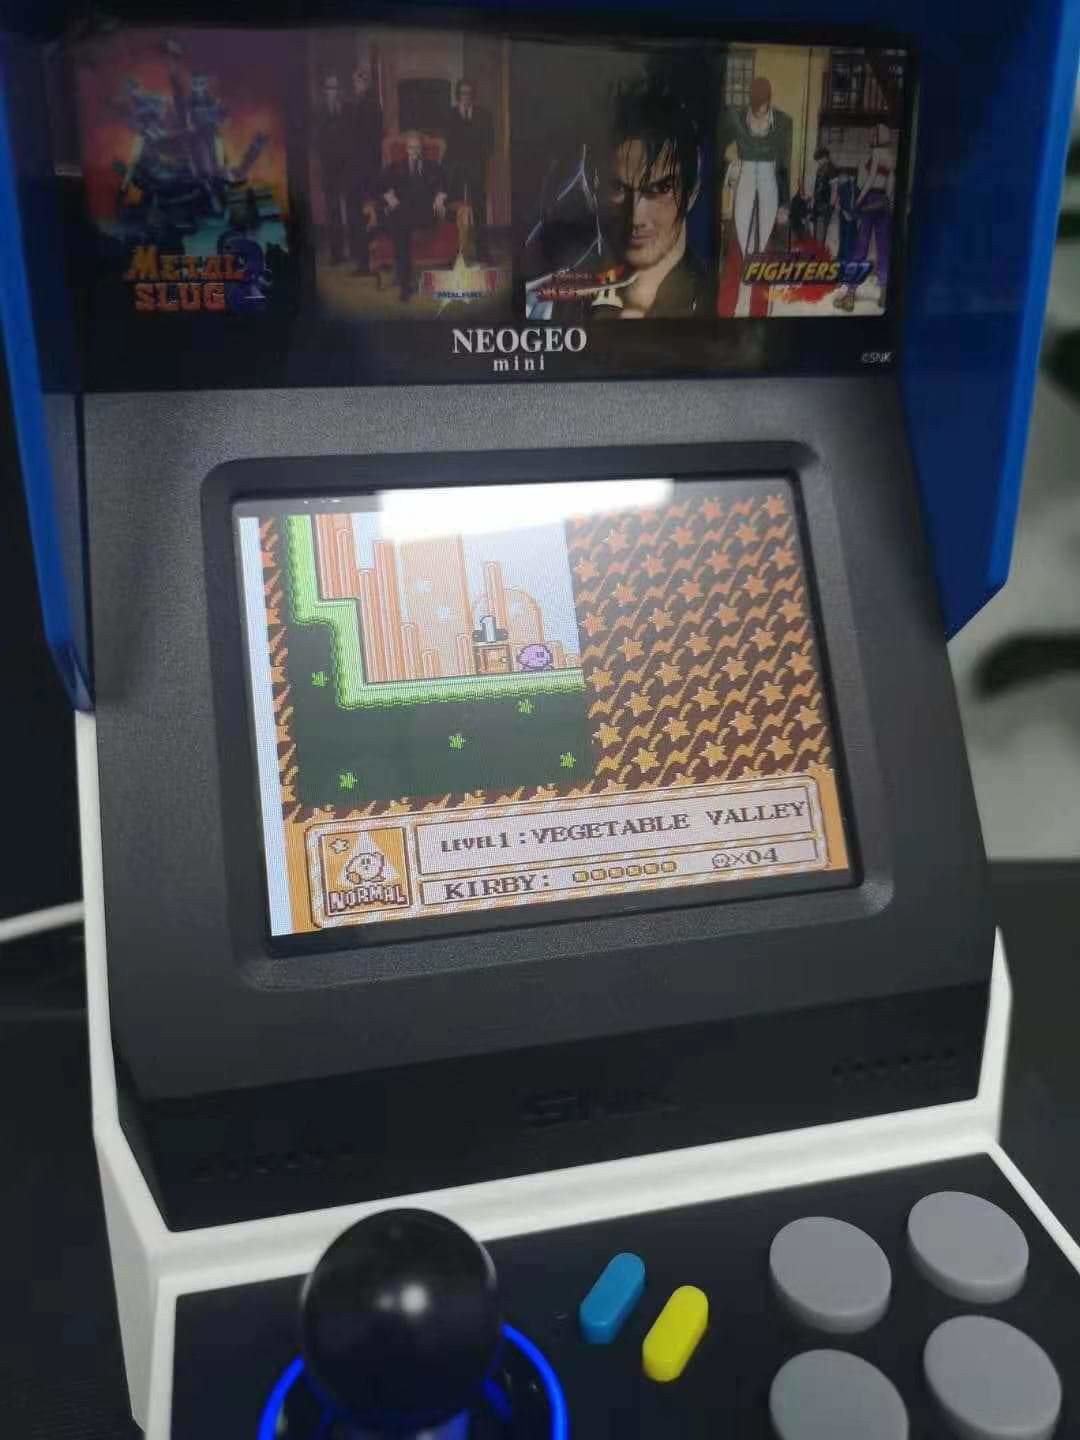 Neo Geo Mini by SNK - Games - Quarter To Three Forums